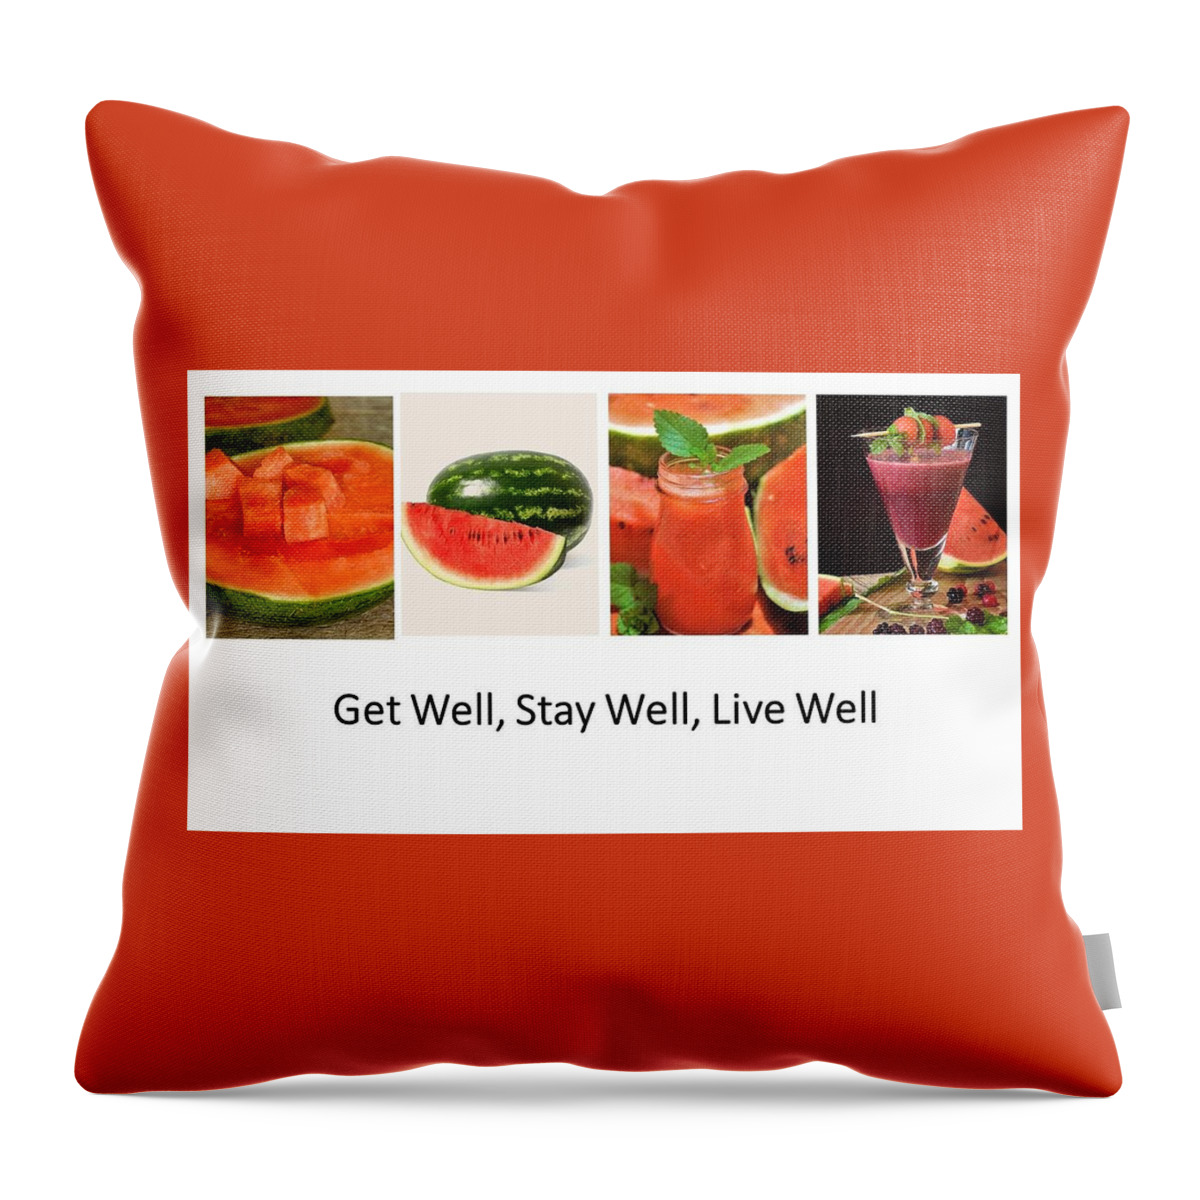 Watermelon Throw Pillow featuring the photograph Watermelon Smoothies by Nancy Ayanna Wyatt